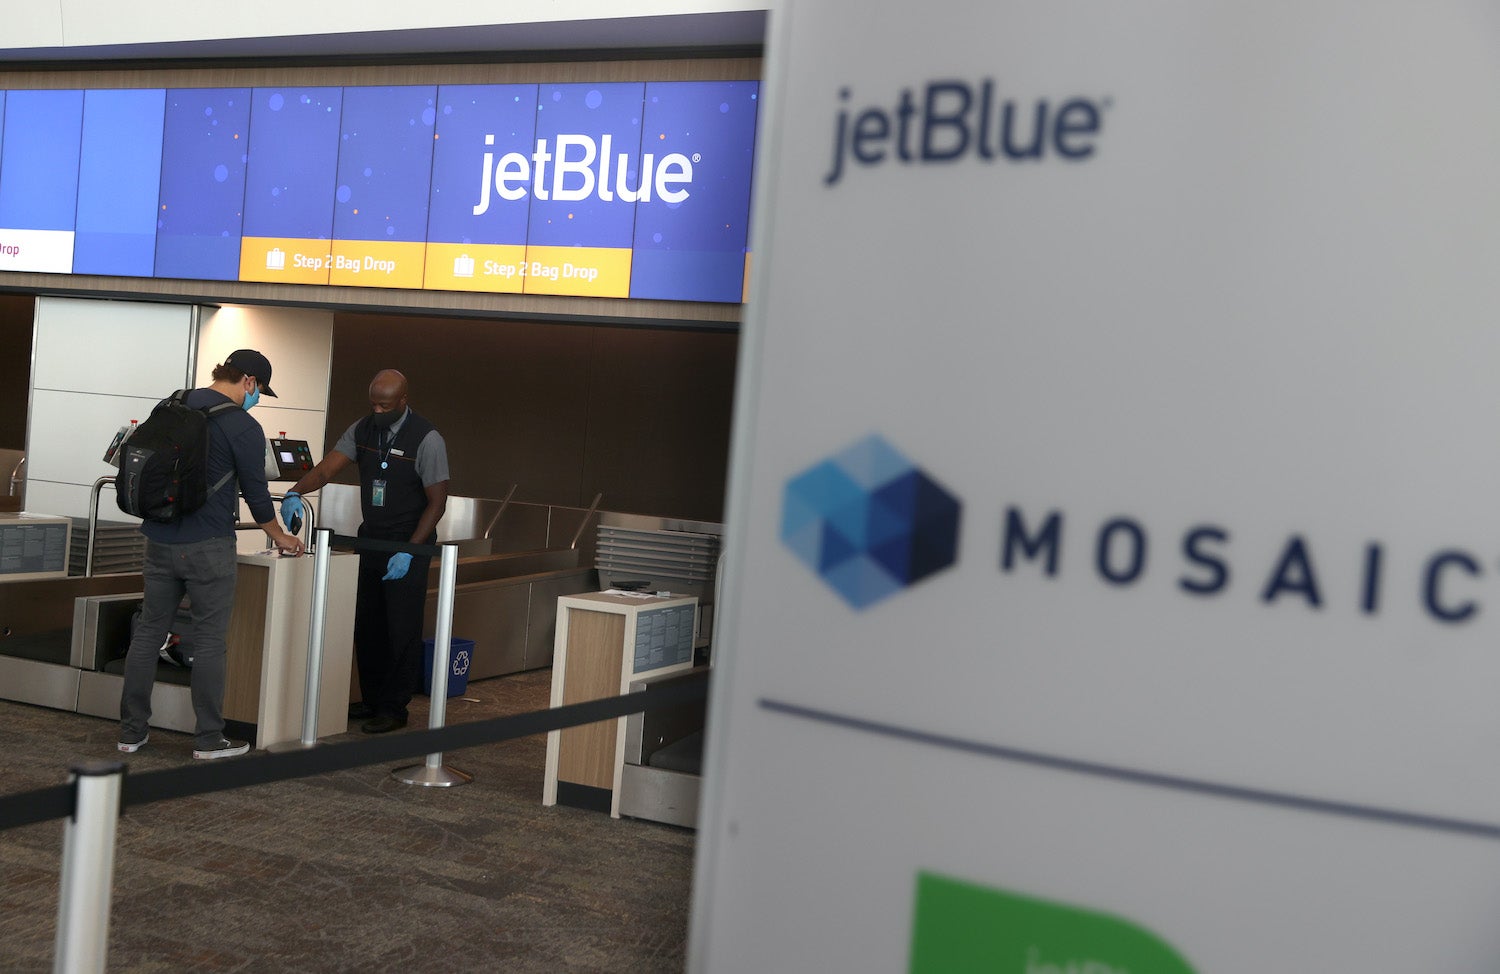 JetBlue Check-In Counter With Mosaic Sign